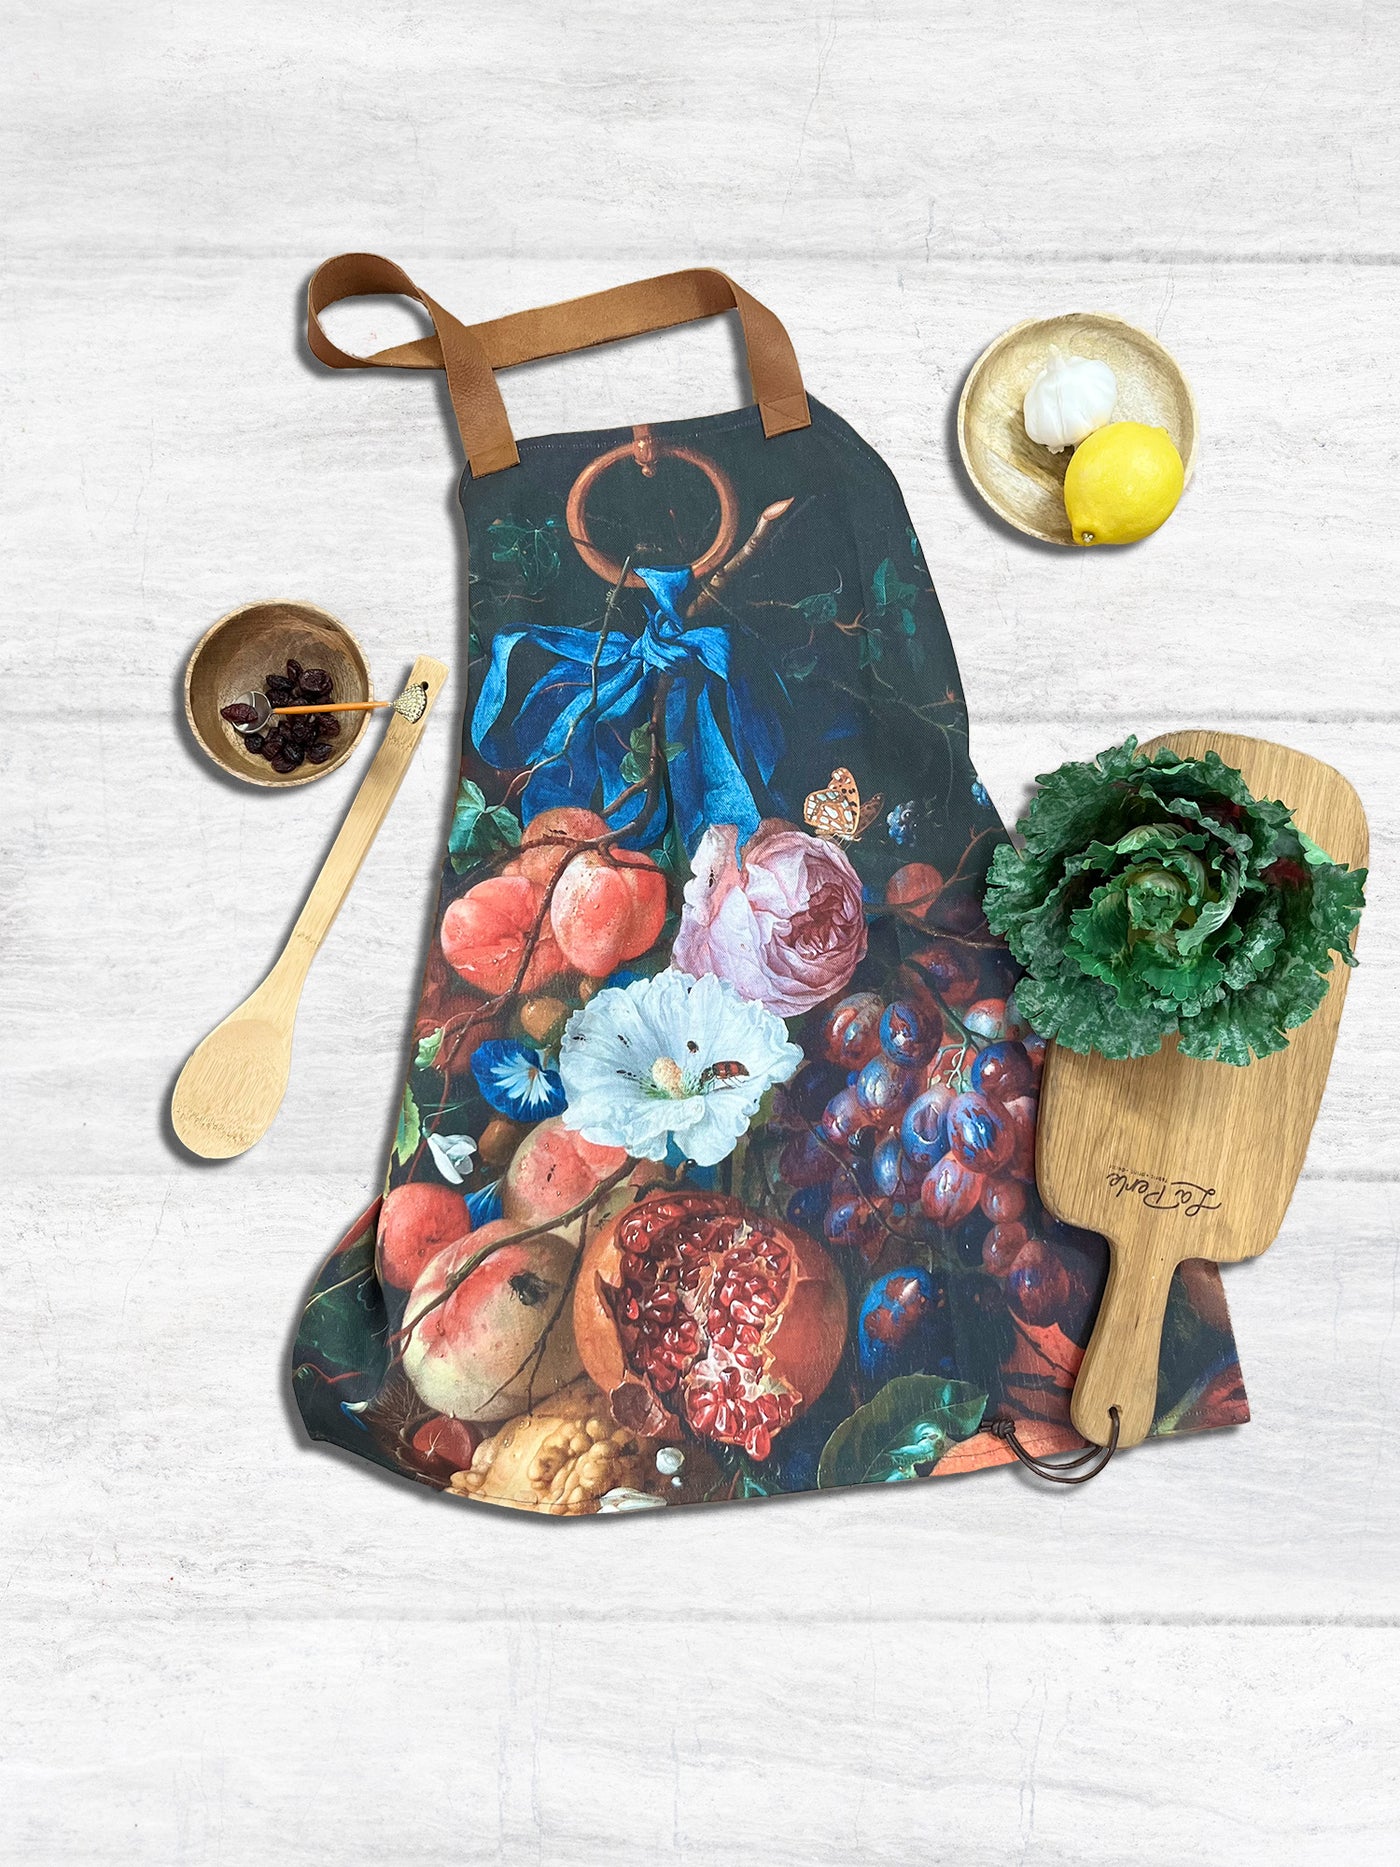 Apron with leather straps laid out on light wood table. Surrounded by cookwares, utensils and vegetables like garlic, lettuce, lemon and raisons. The Apron is printed showing artwork titled Still Life. The print shows various fruits and flowers in vibrant red, orange and blue hues against a dark background. There are insects in open fruit and crawling over flowers.